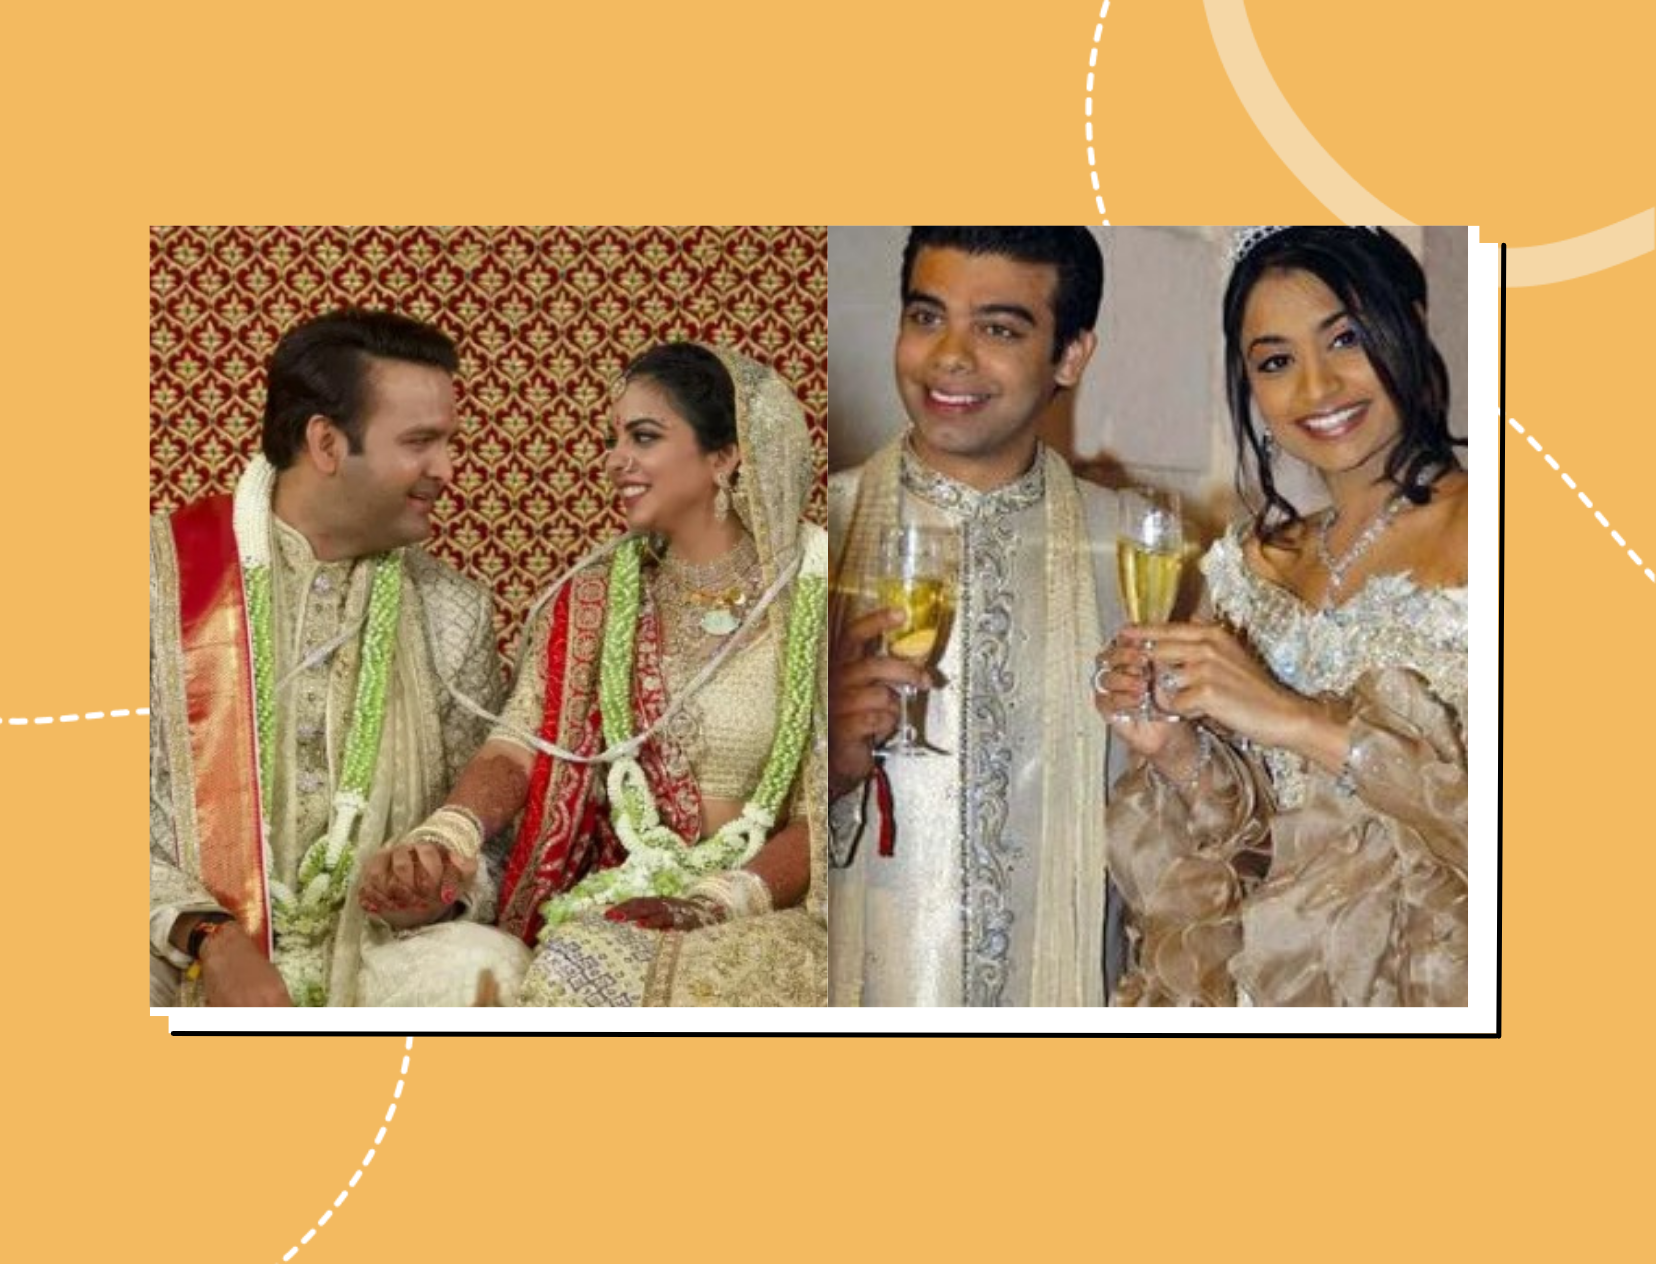 7 Most Expensive Indian Weddings That'll Make You Feel Hella Poor